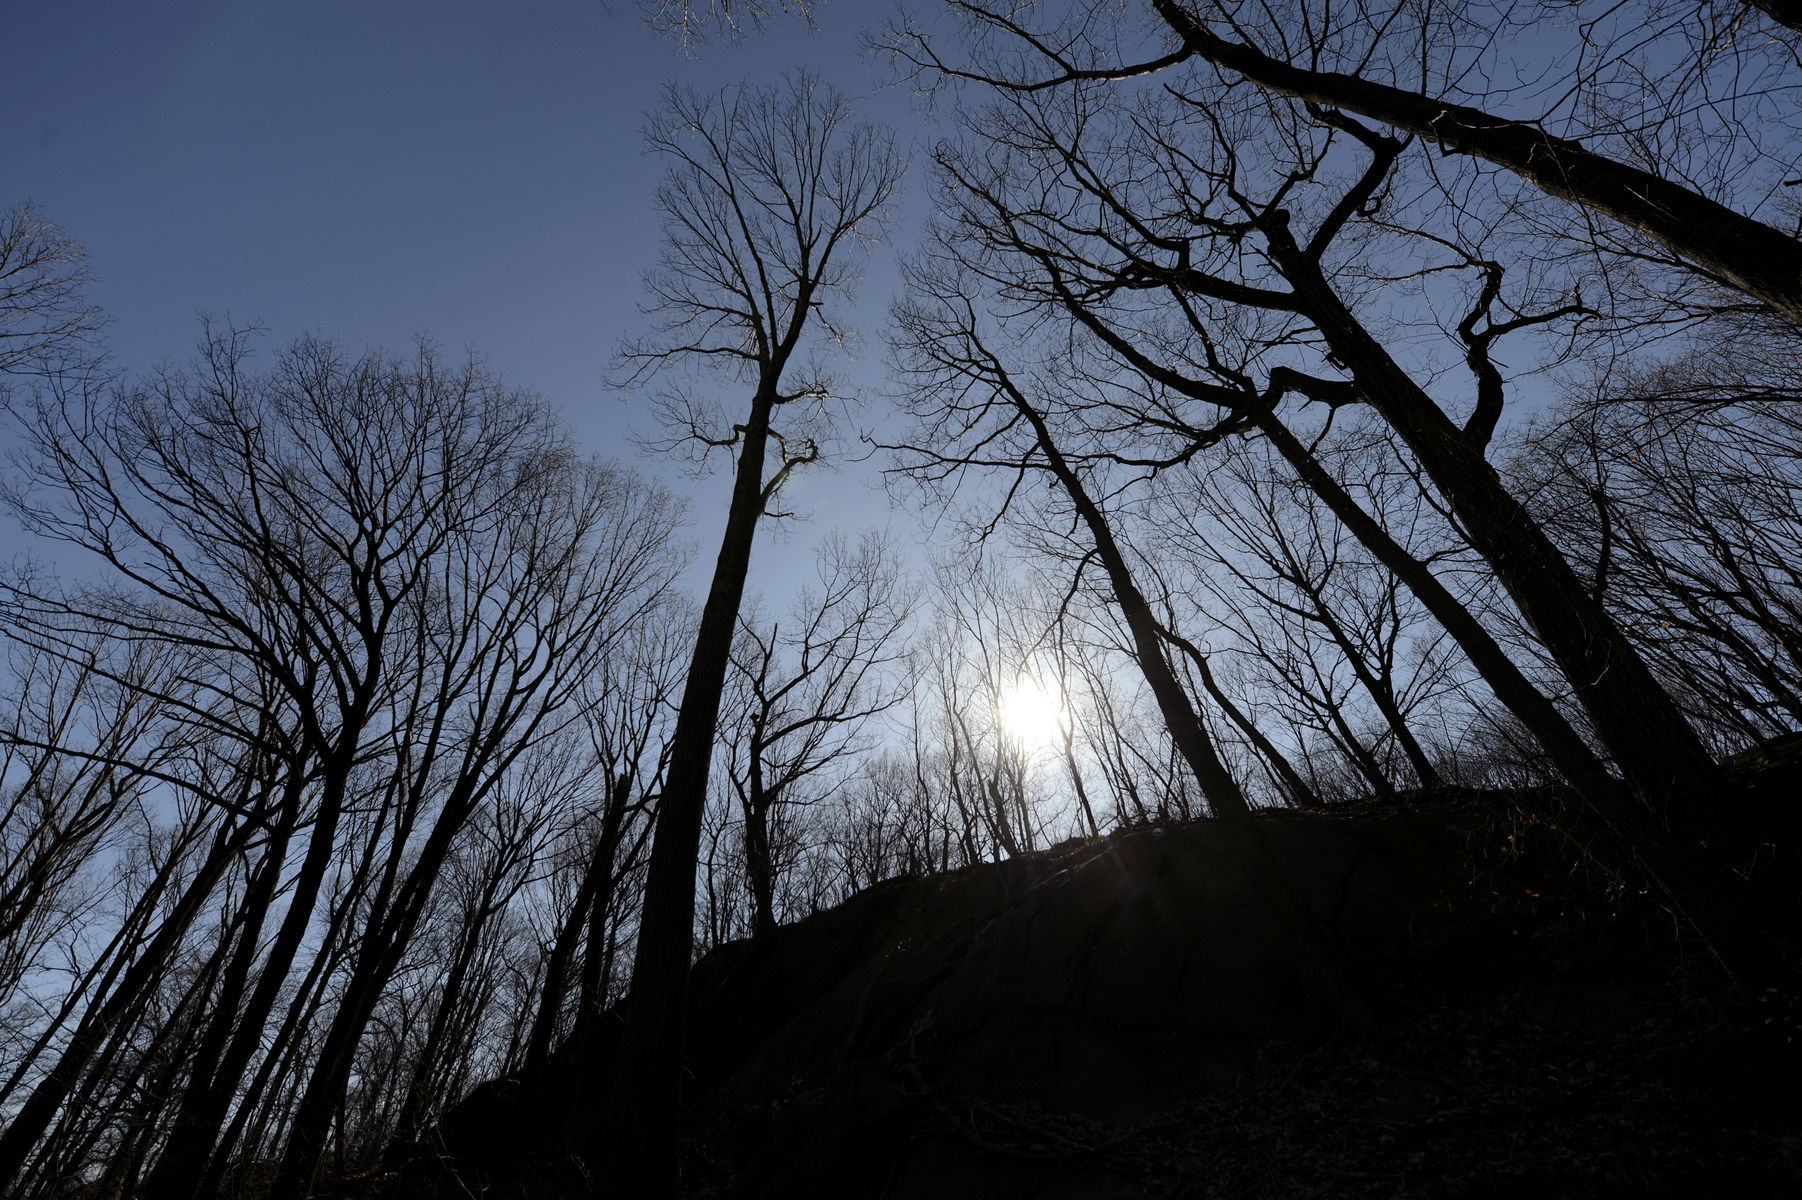 Inwood Hill Park, Manhattan's only old growth forest : Nature : Photography by Adam Stoltman: Sports Photography, The Arts, Portraiture, Travel, Photojournalism and Fine Art in New York